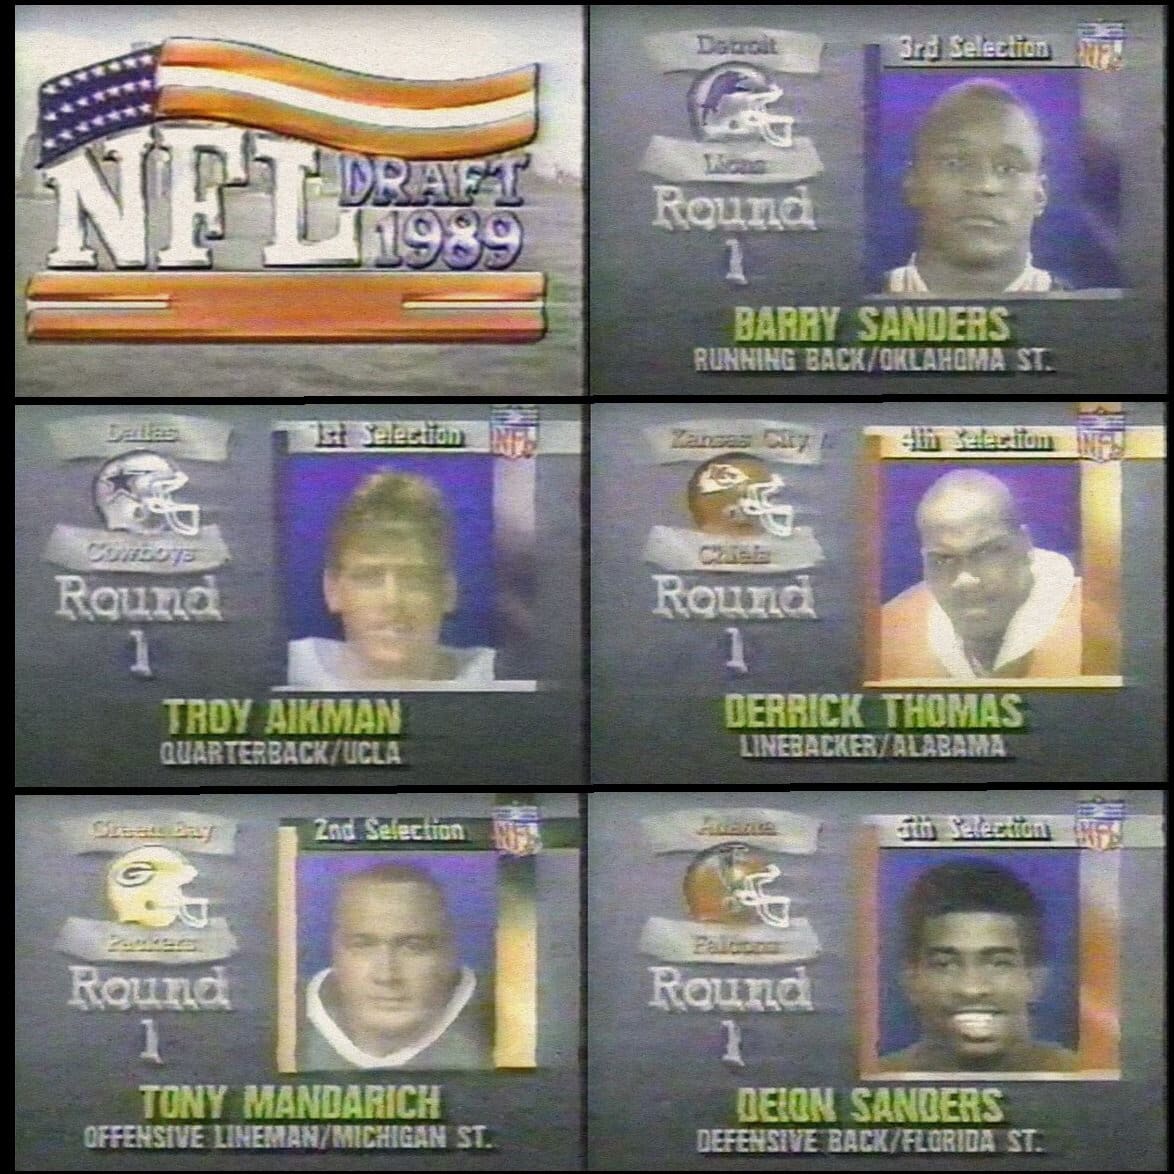 In 1989 my @NFLDraft class was a monster.